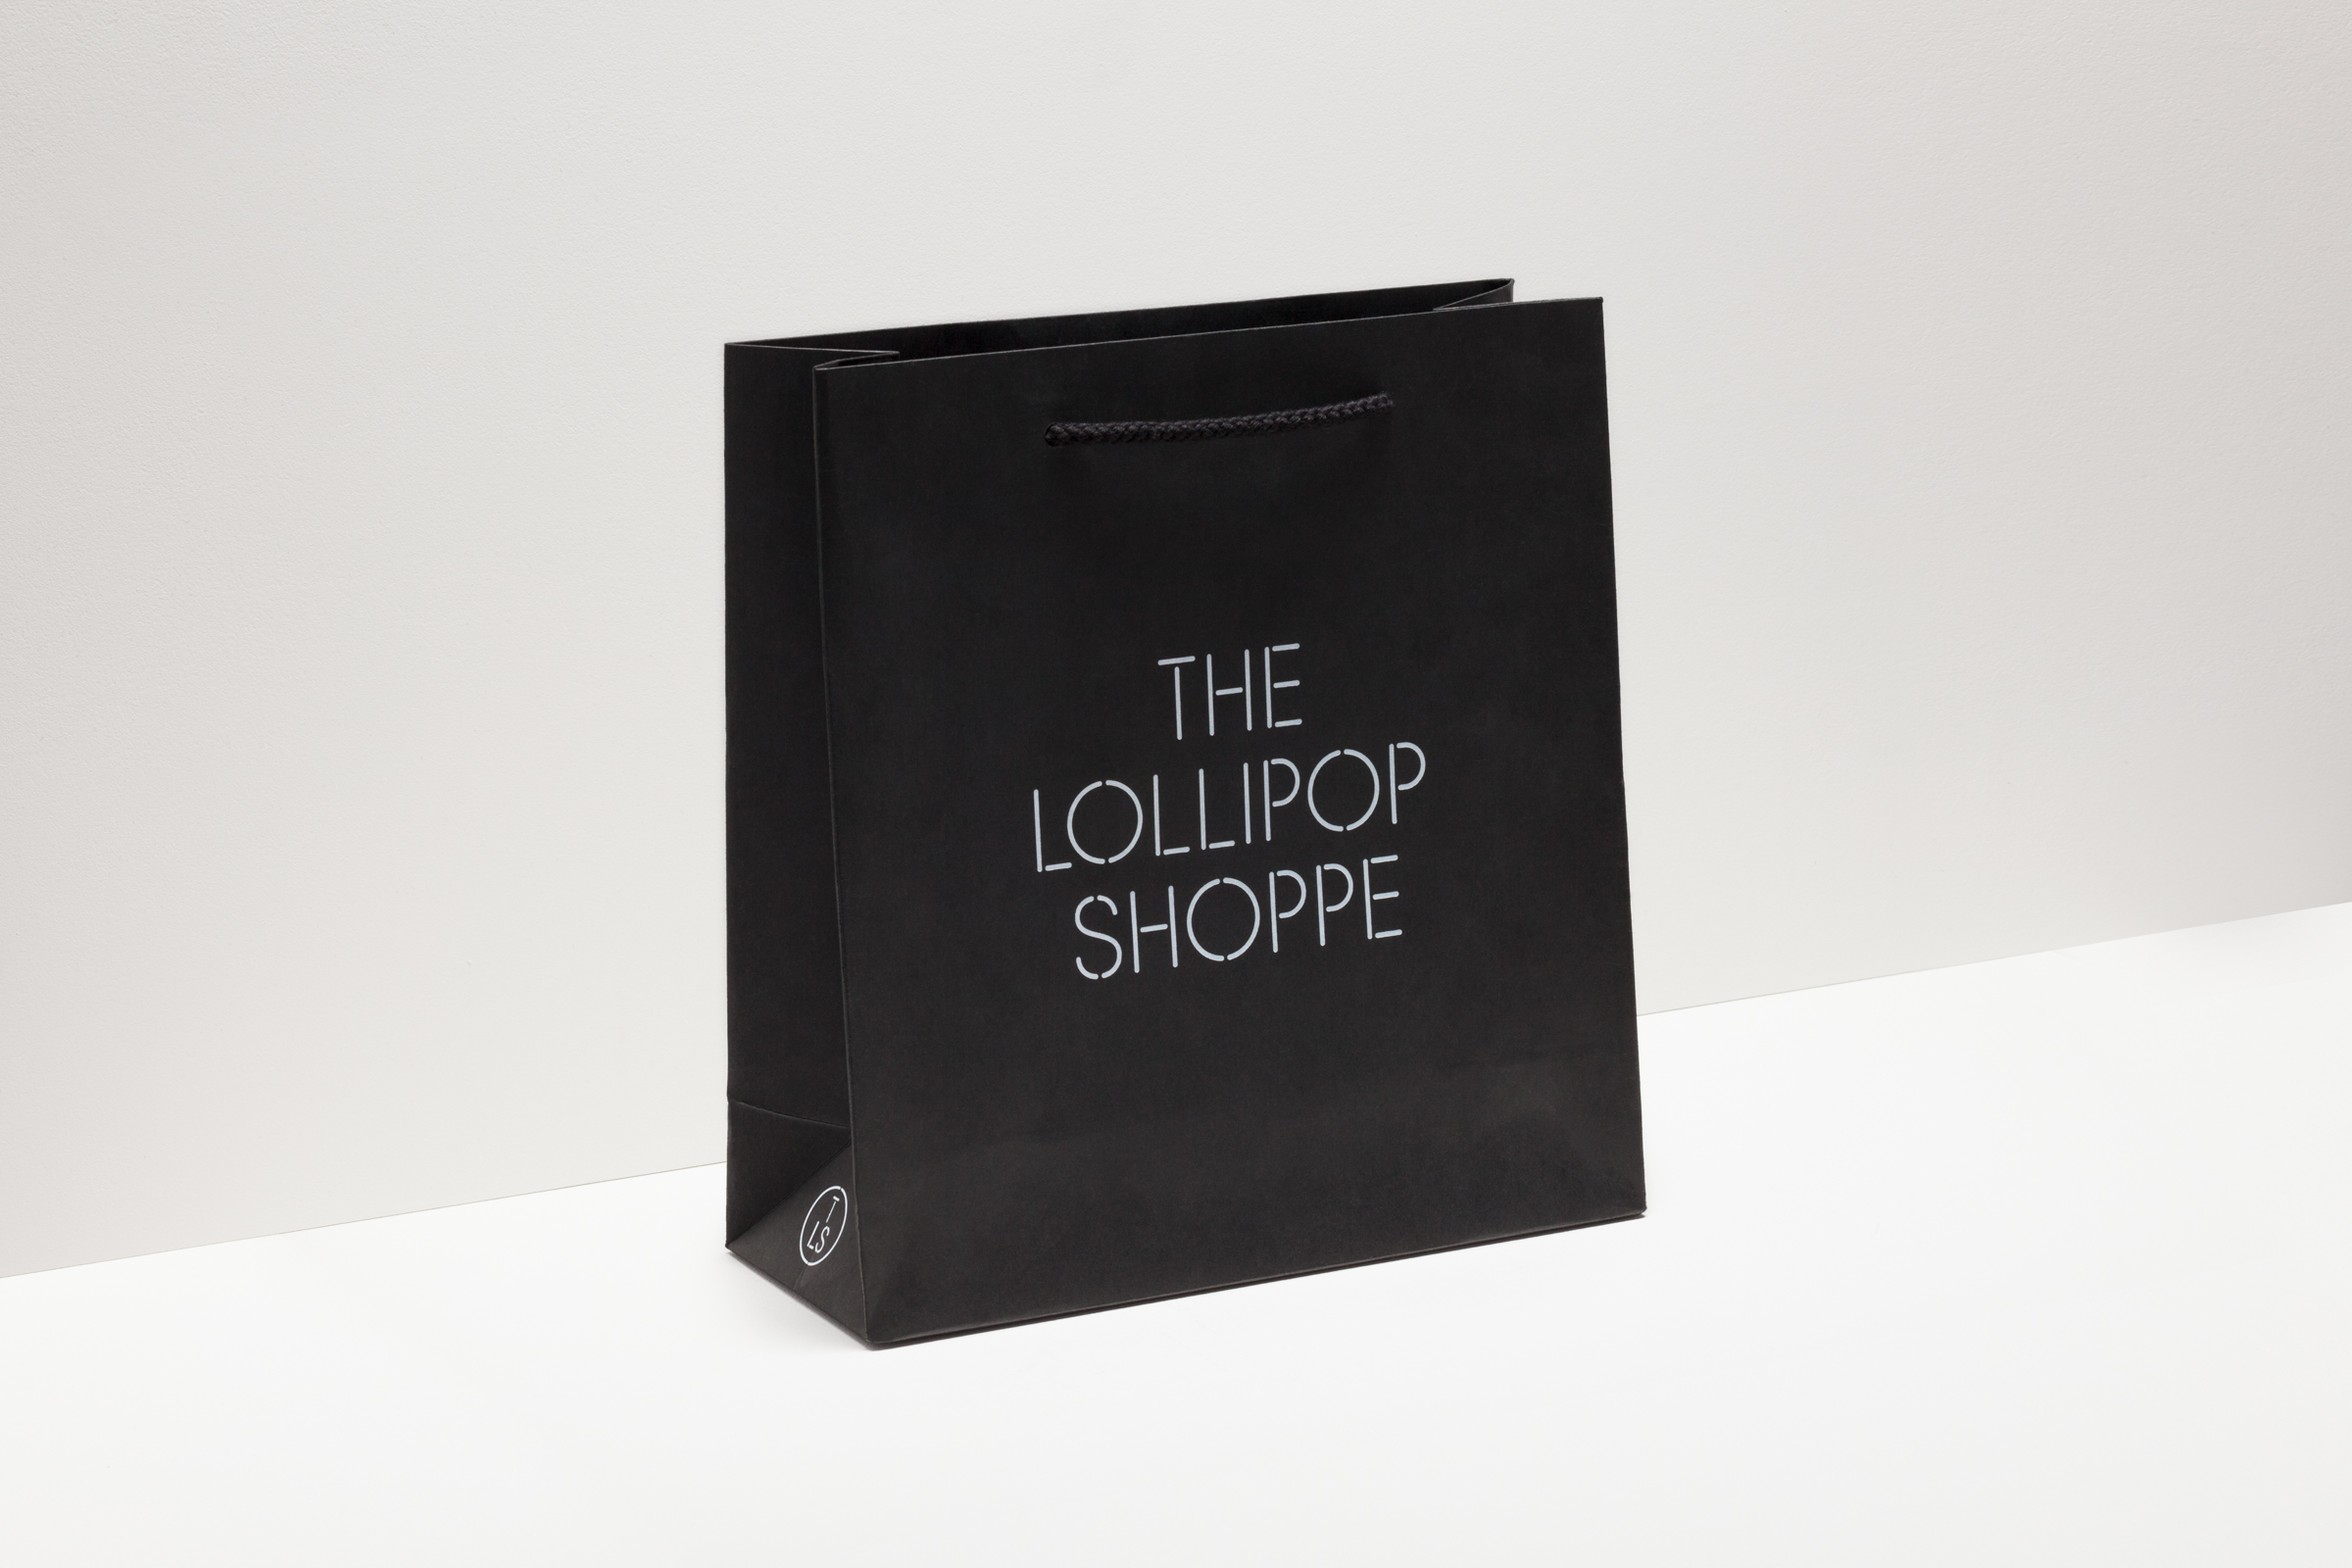 Logo and bag with white foil detail created by Studio Makgill for designer furniture and accessories retailer The Lollipop Shoppe